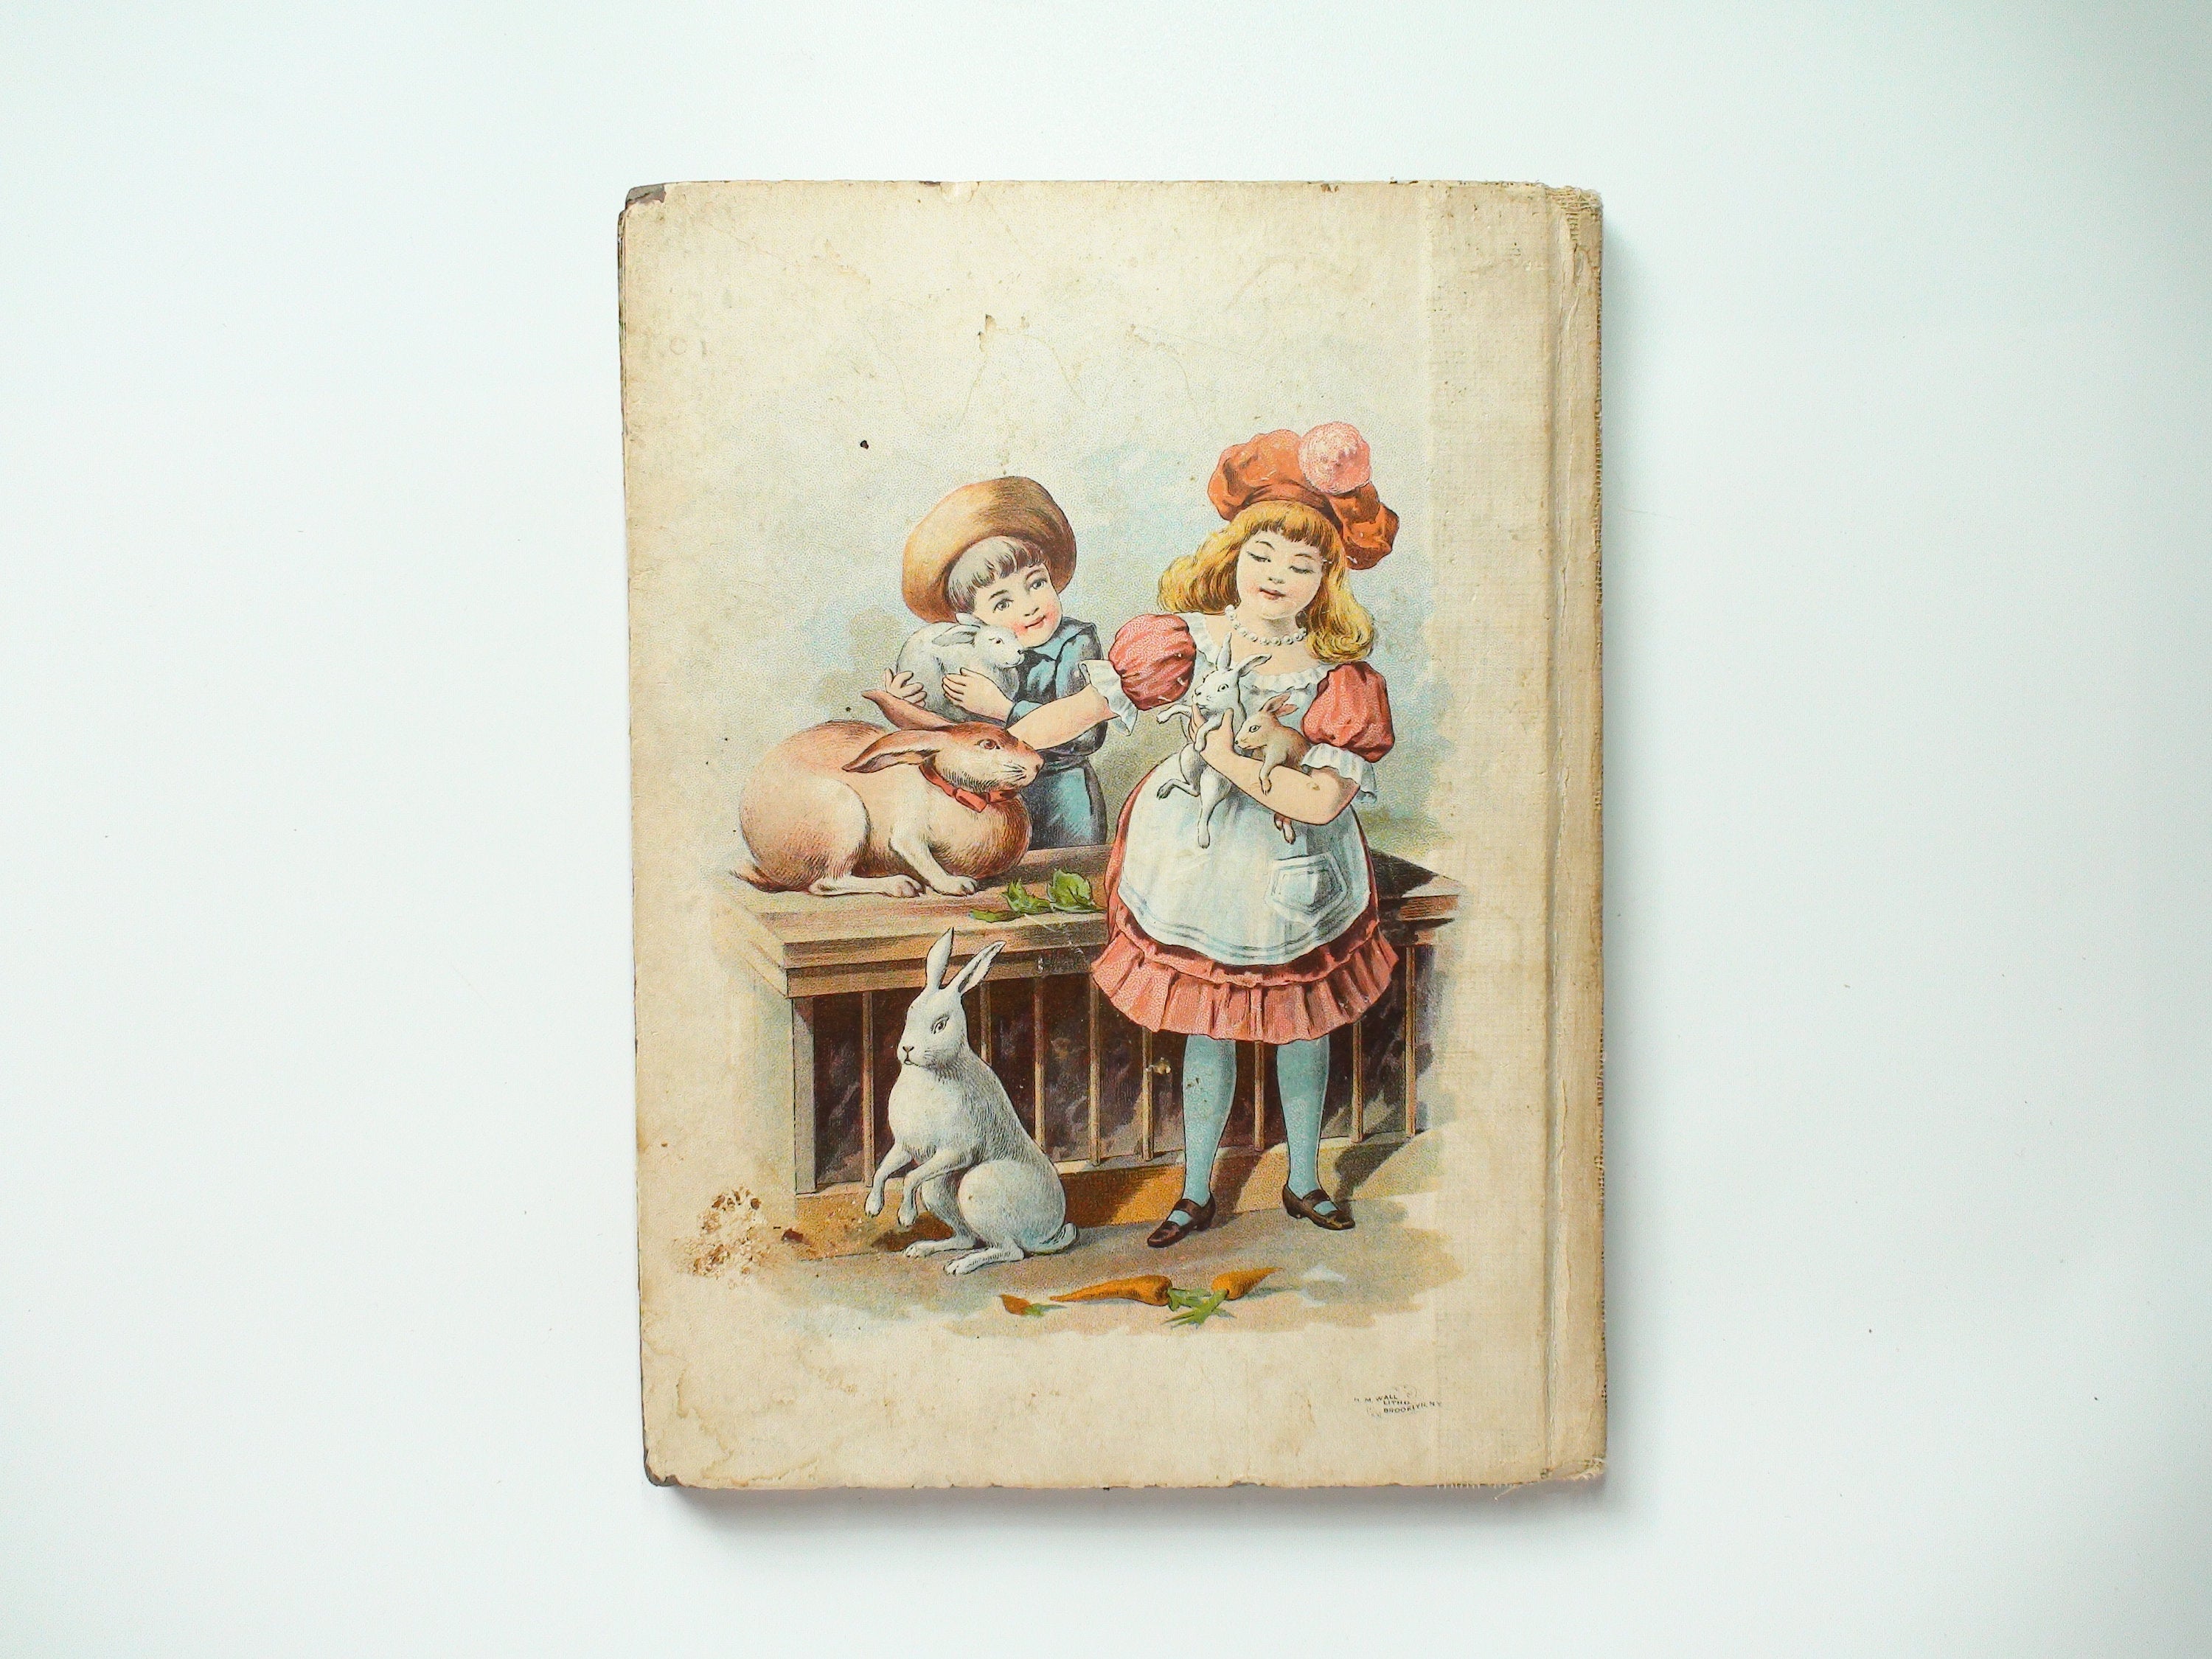 Tiny and her Big Cousin Ben, Illustrated Victorian Children's Book, Rare, 1893